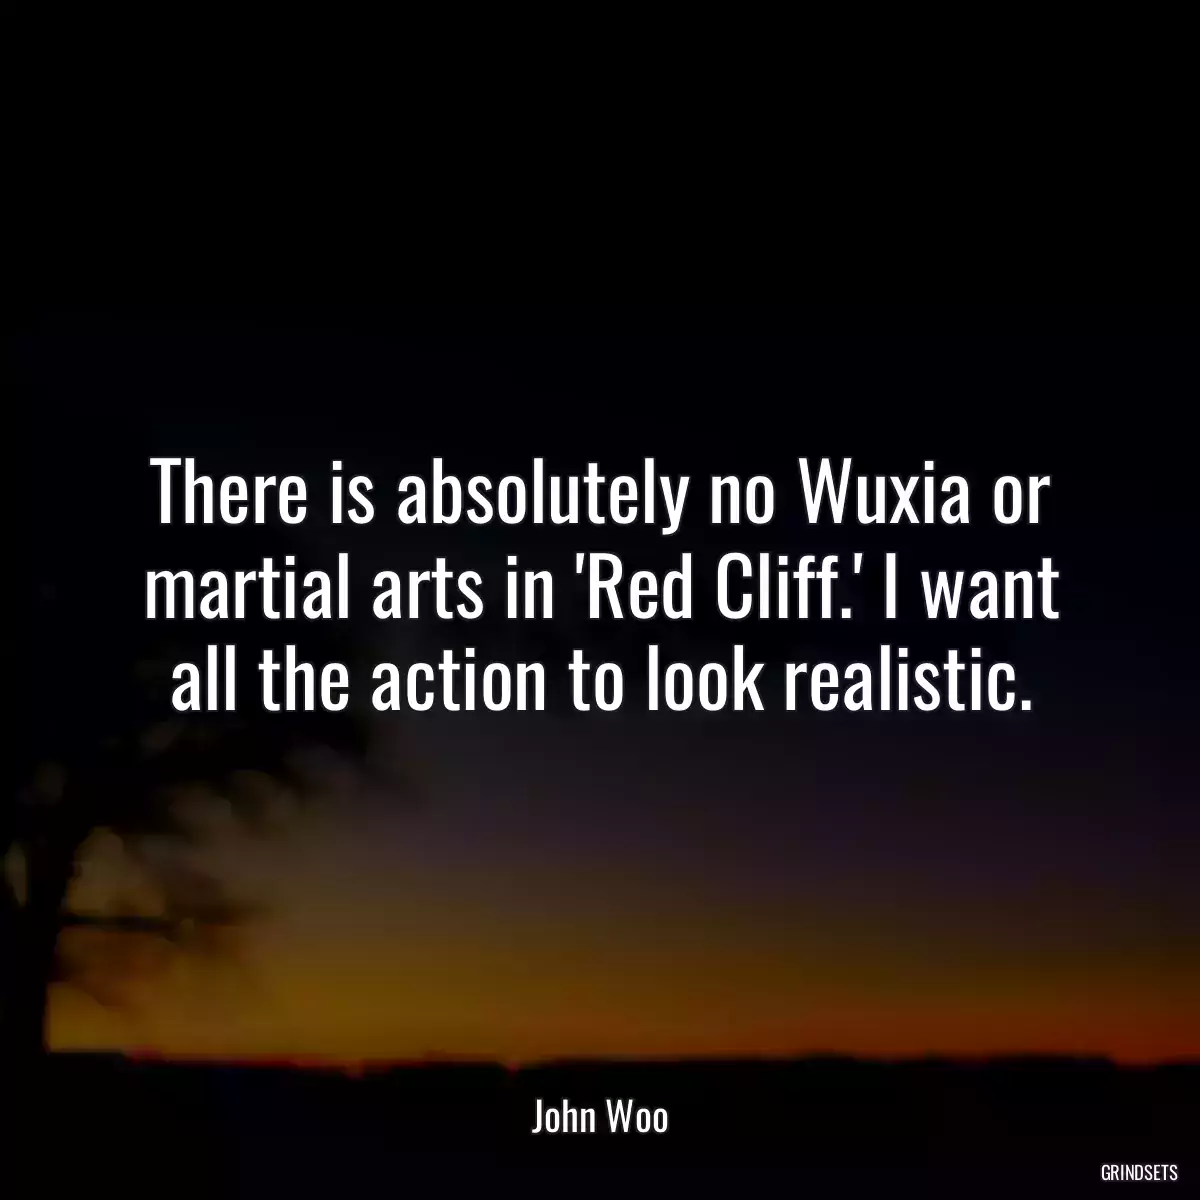 There is absolutely no Wuxia or martial arts in \'Red Cliff.\' I want all the action to look realistic.